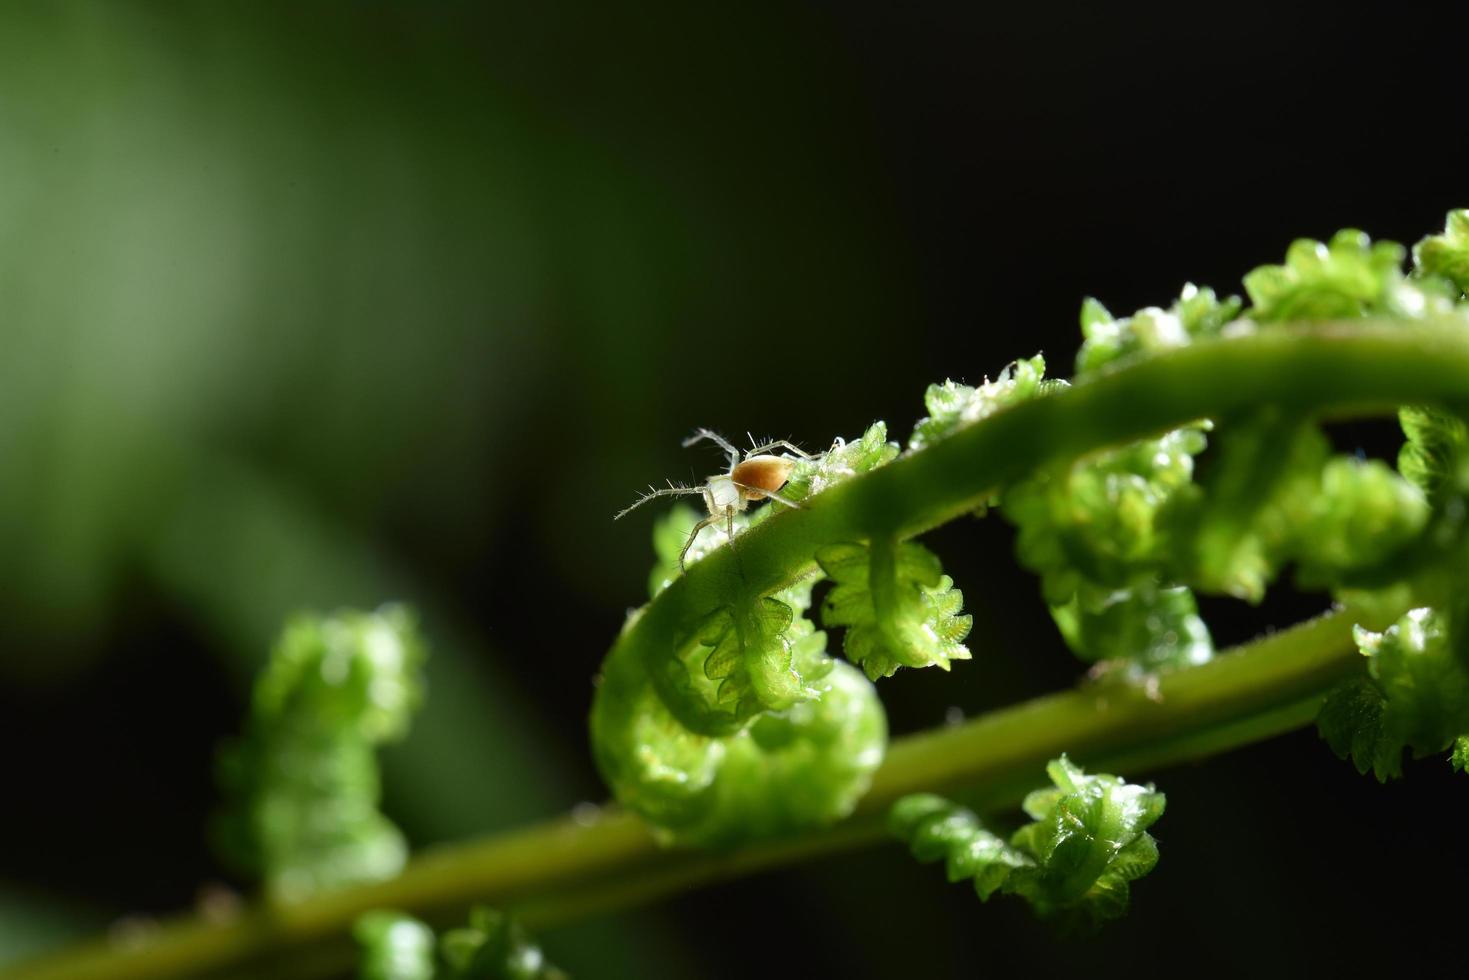 Spiders in nature, ferns and leaves photo